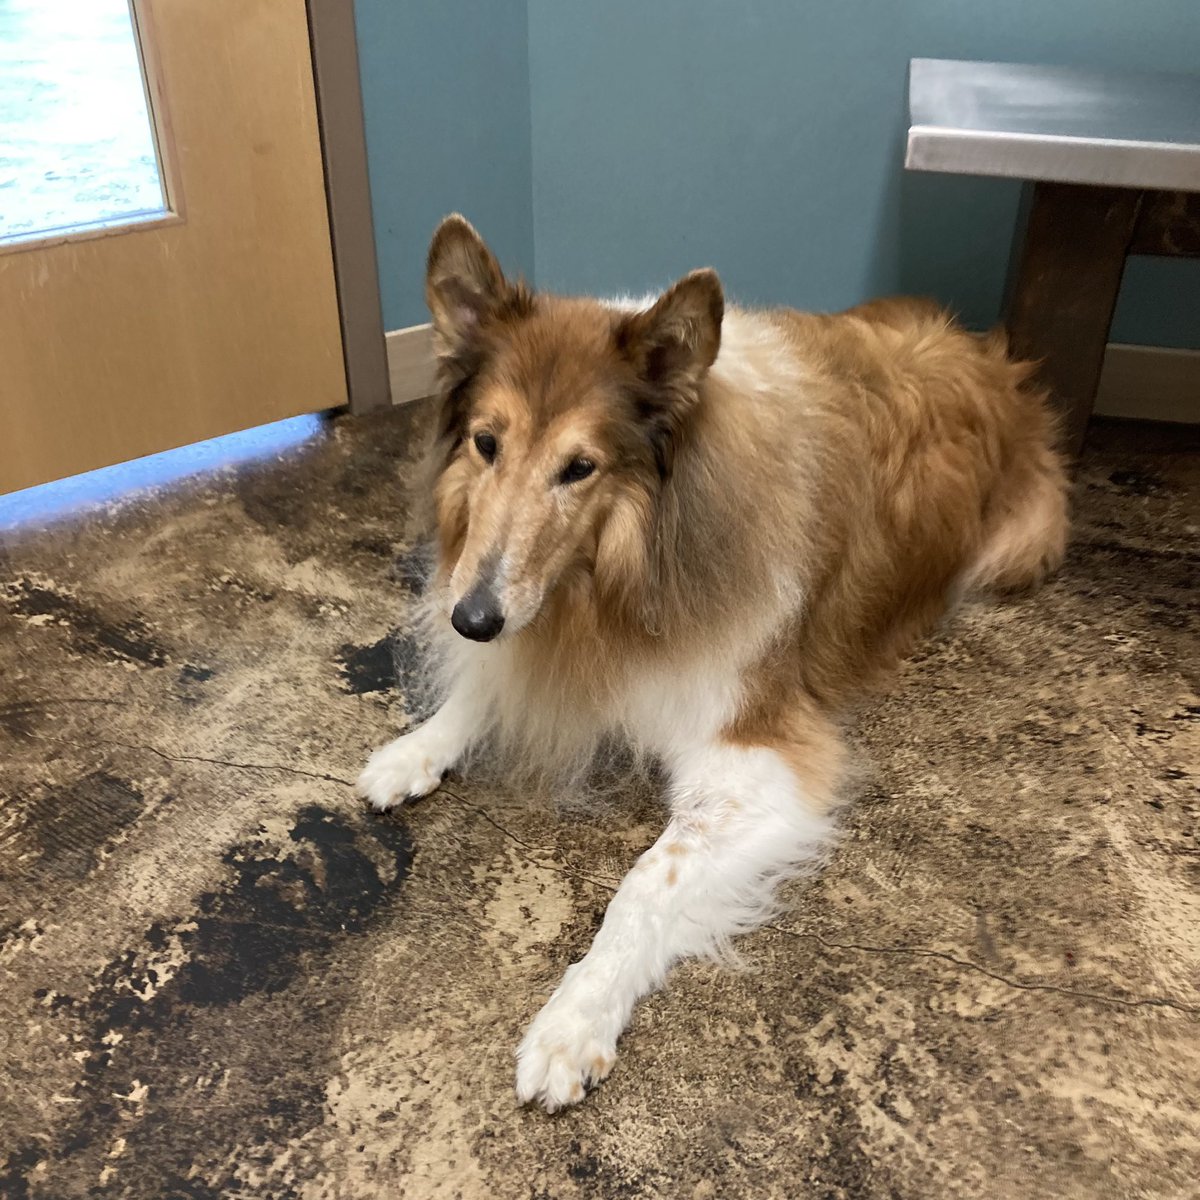 Another day, another trip to the #vetclinic. I’m doing better walking but had some 😟 new symptoms so went back for blood work and starting antibiotics as a precaution. Good news is I’m getting lots of peanut butter with all these medications. 

#seniordog #roughcollie #vetvisit